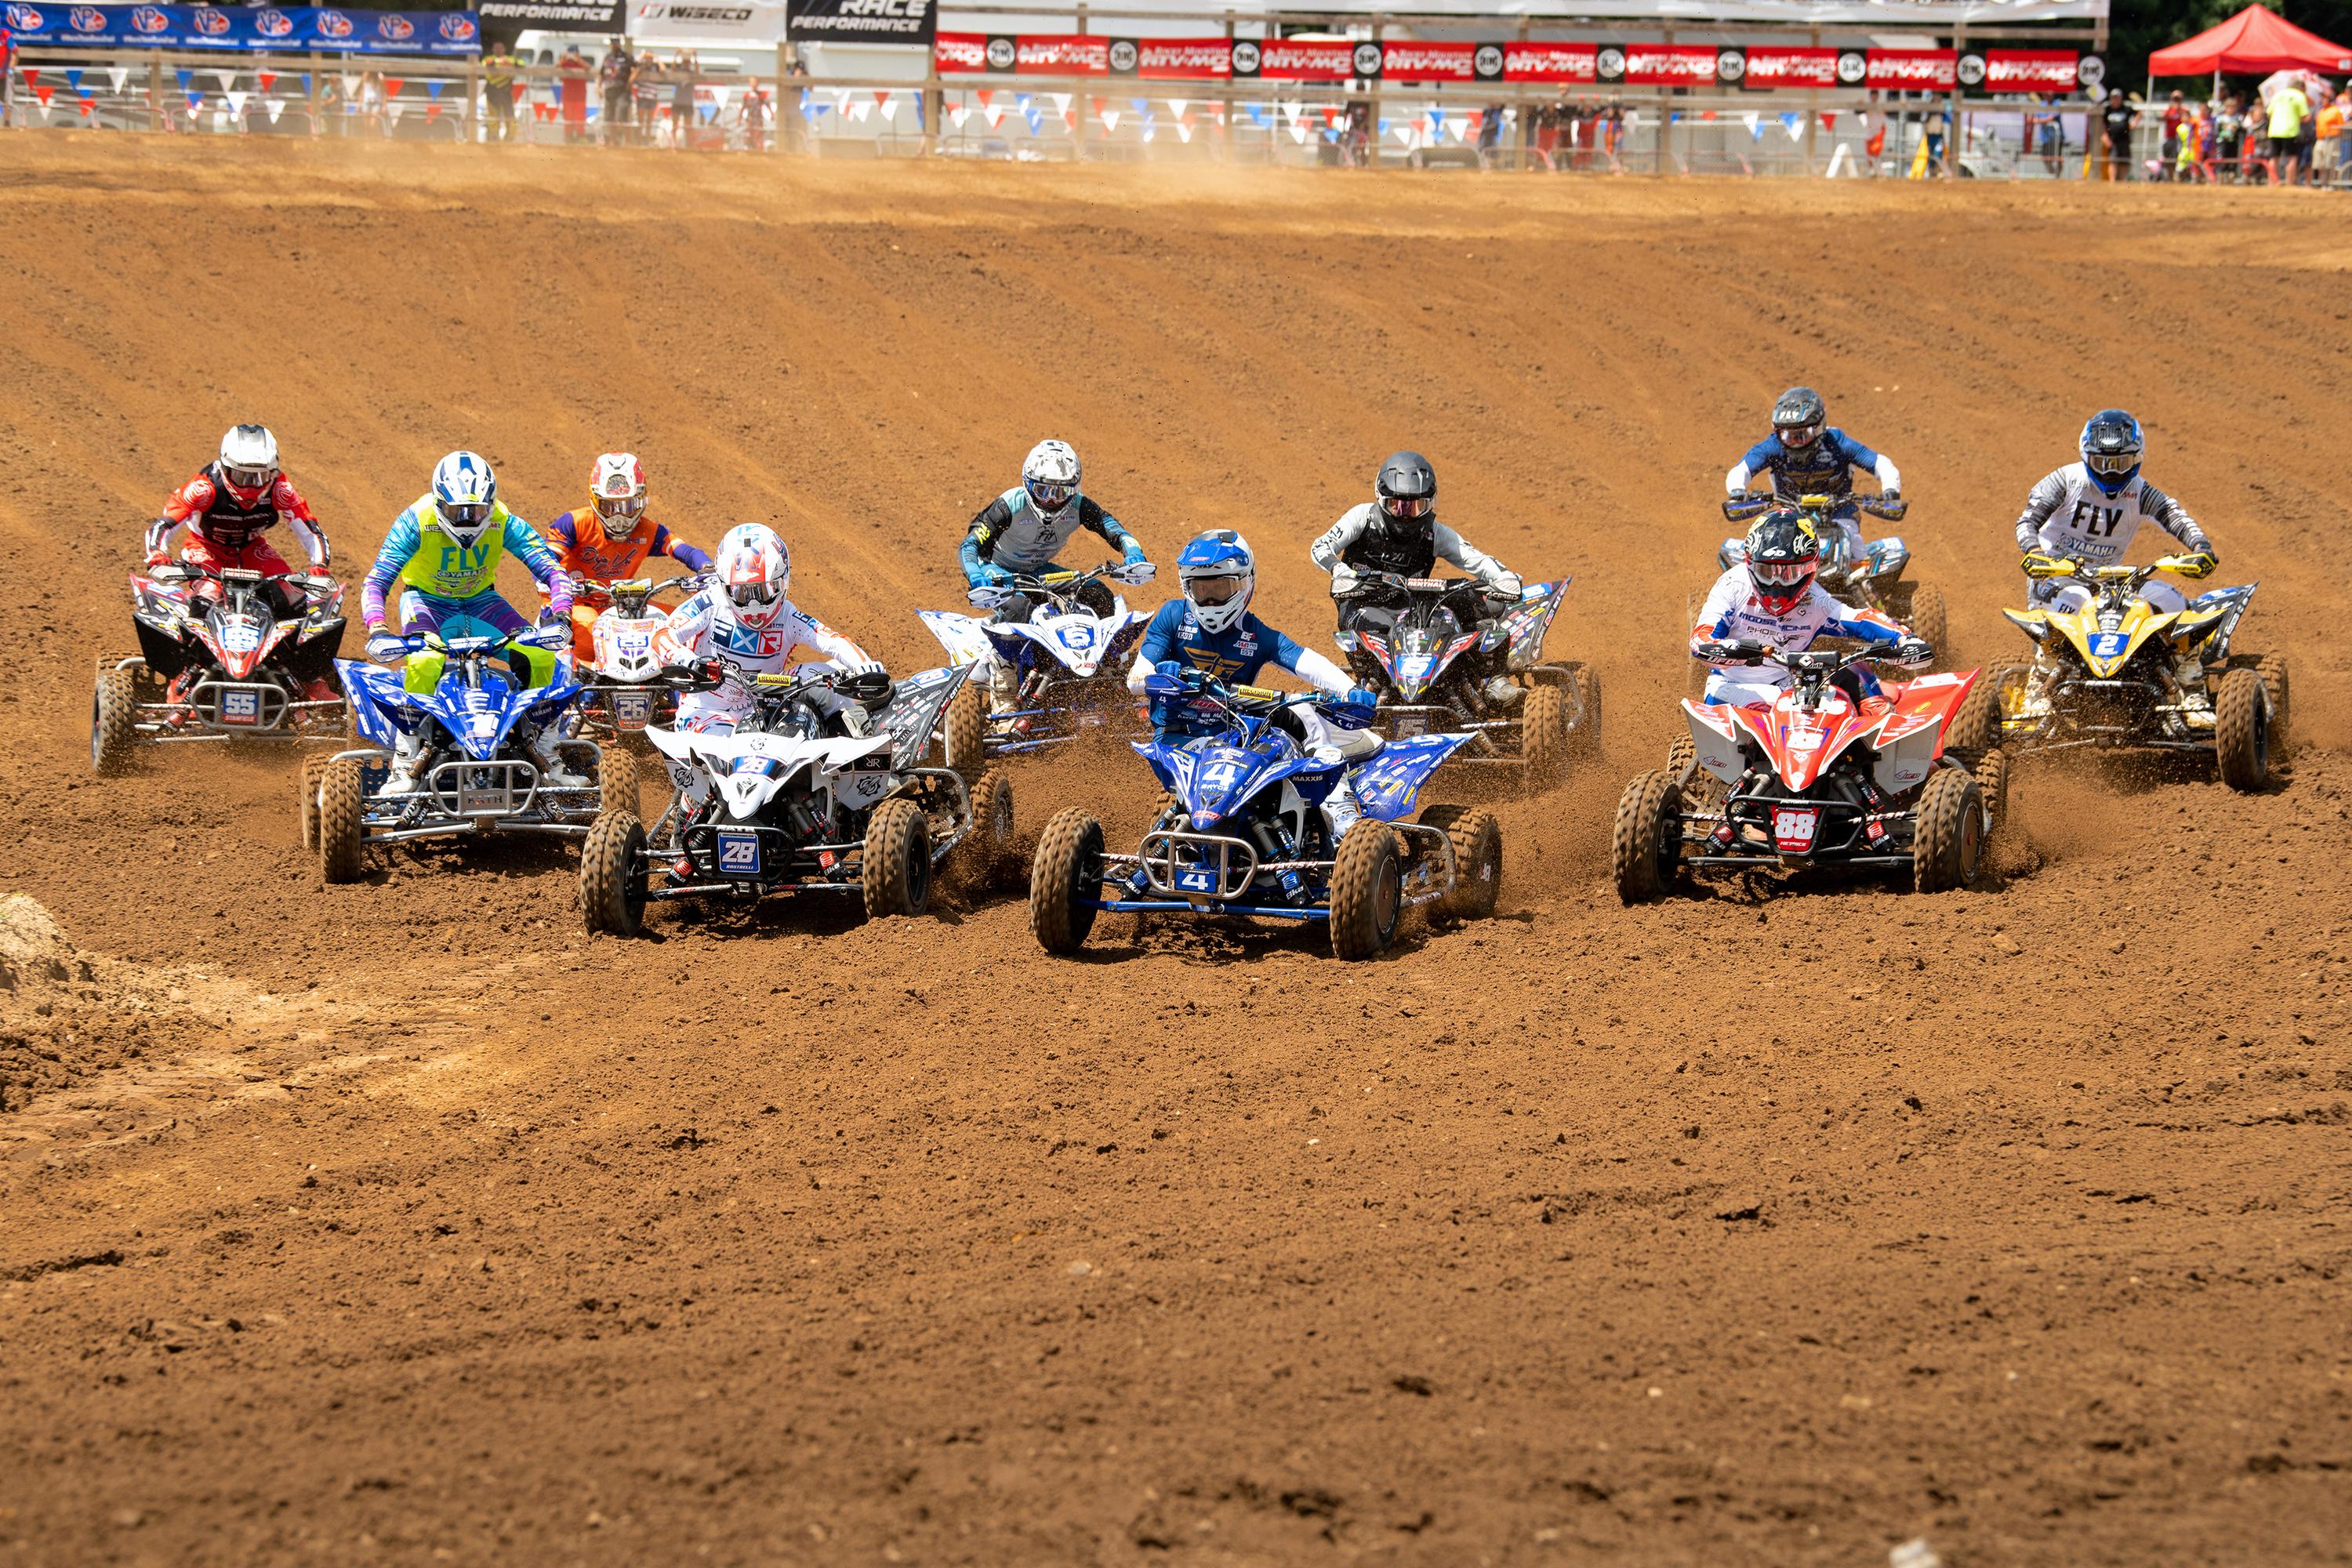 Competition Bulletin 2023-3: Final 2023 AMA Pro ATV Motocross Rules Posted